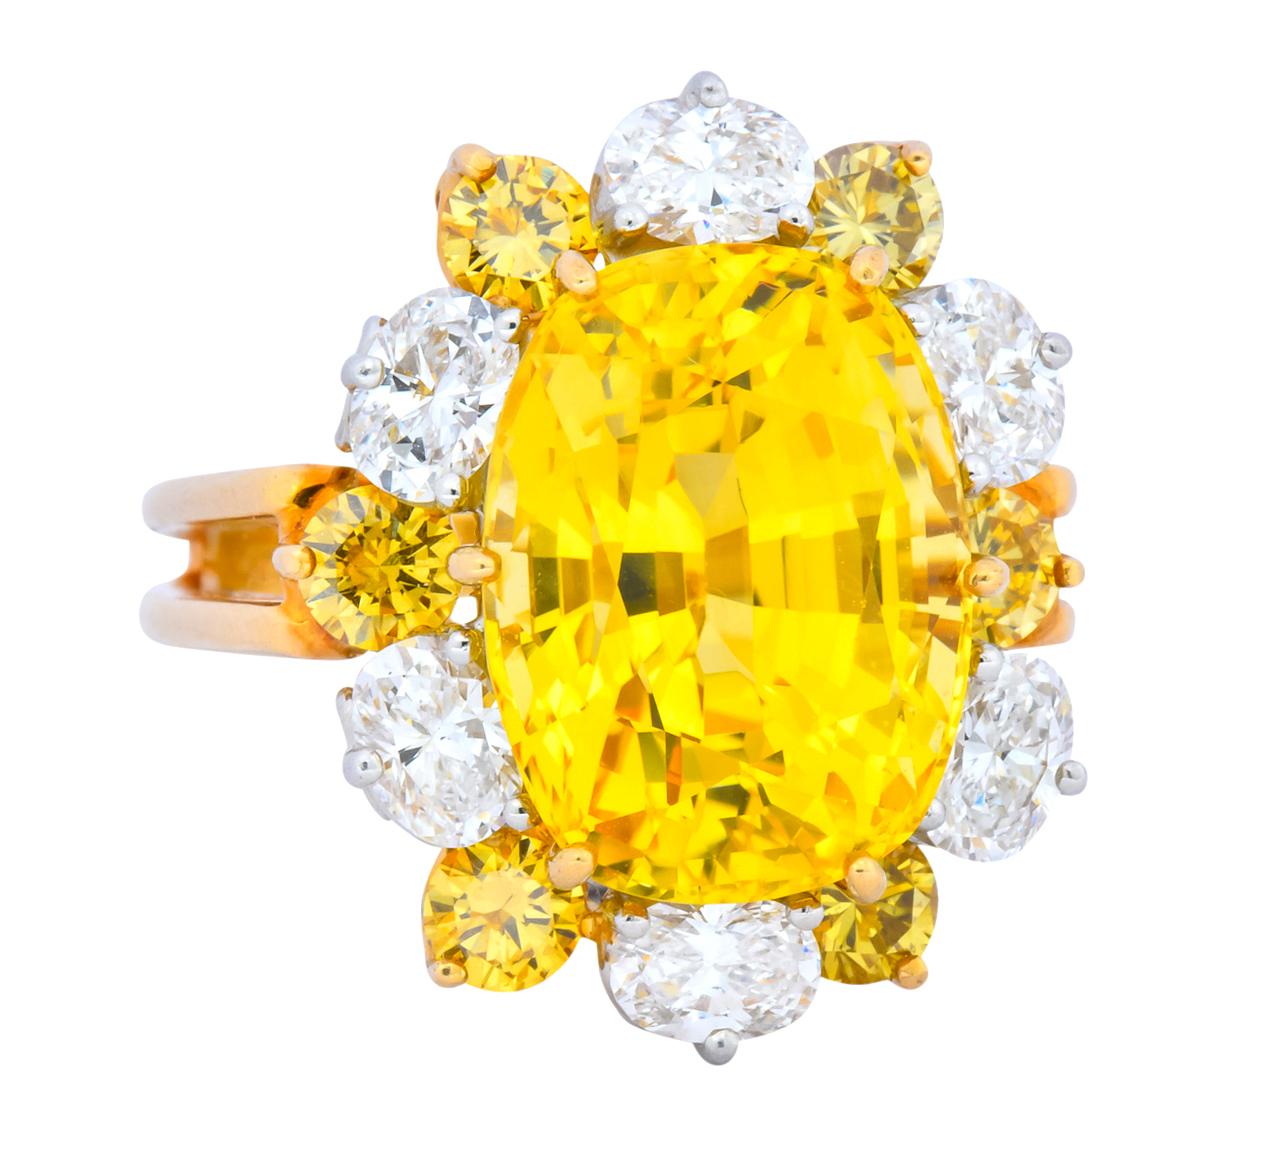 Centering a cushion cut golden yellow sapphire weighing 12.34 carats total, bright vivid yellow with no evidence of heat treatment

In a 